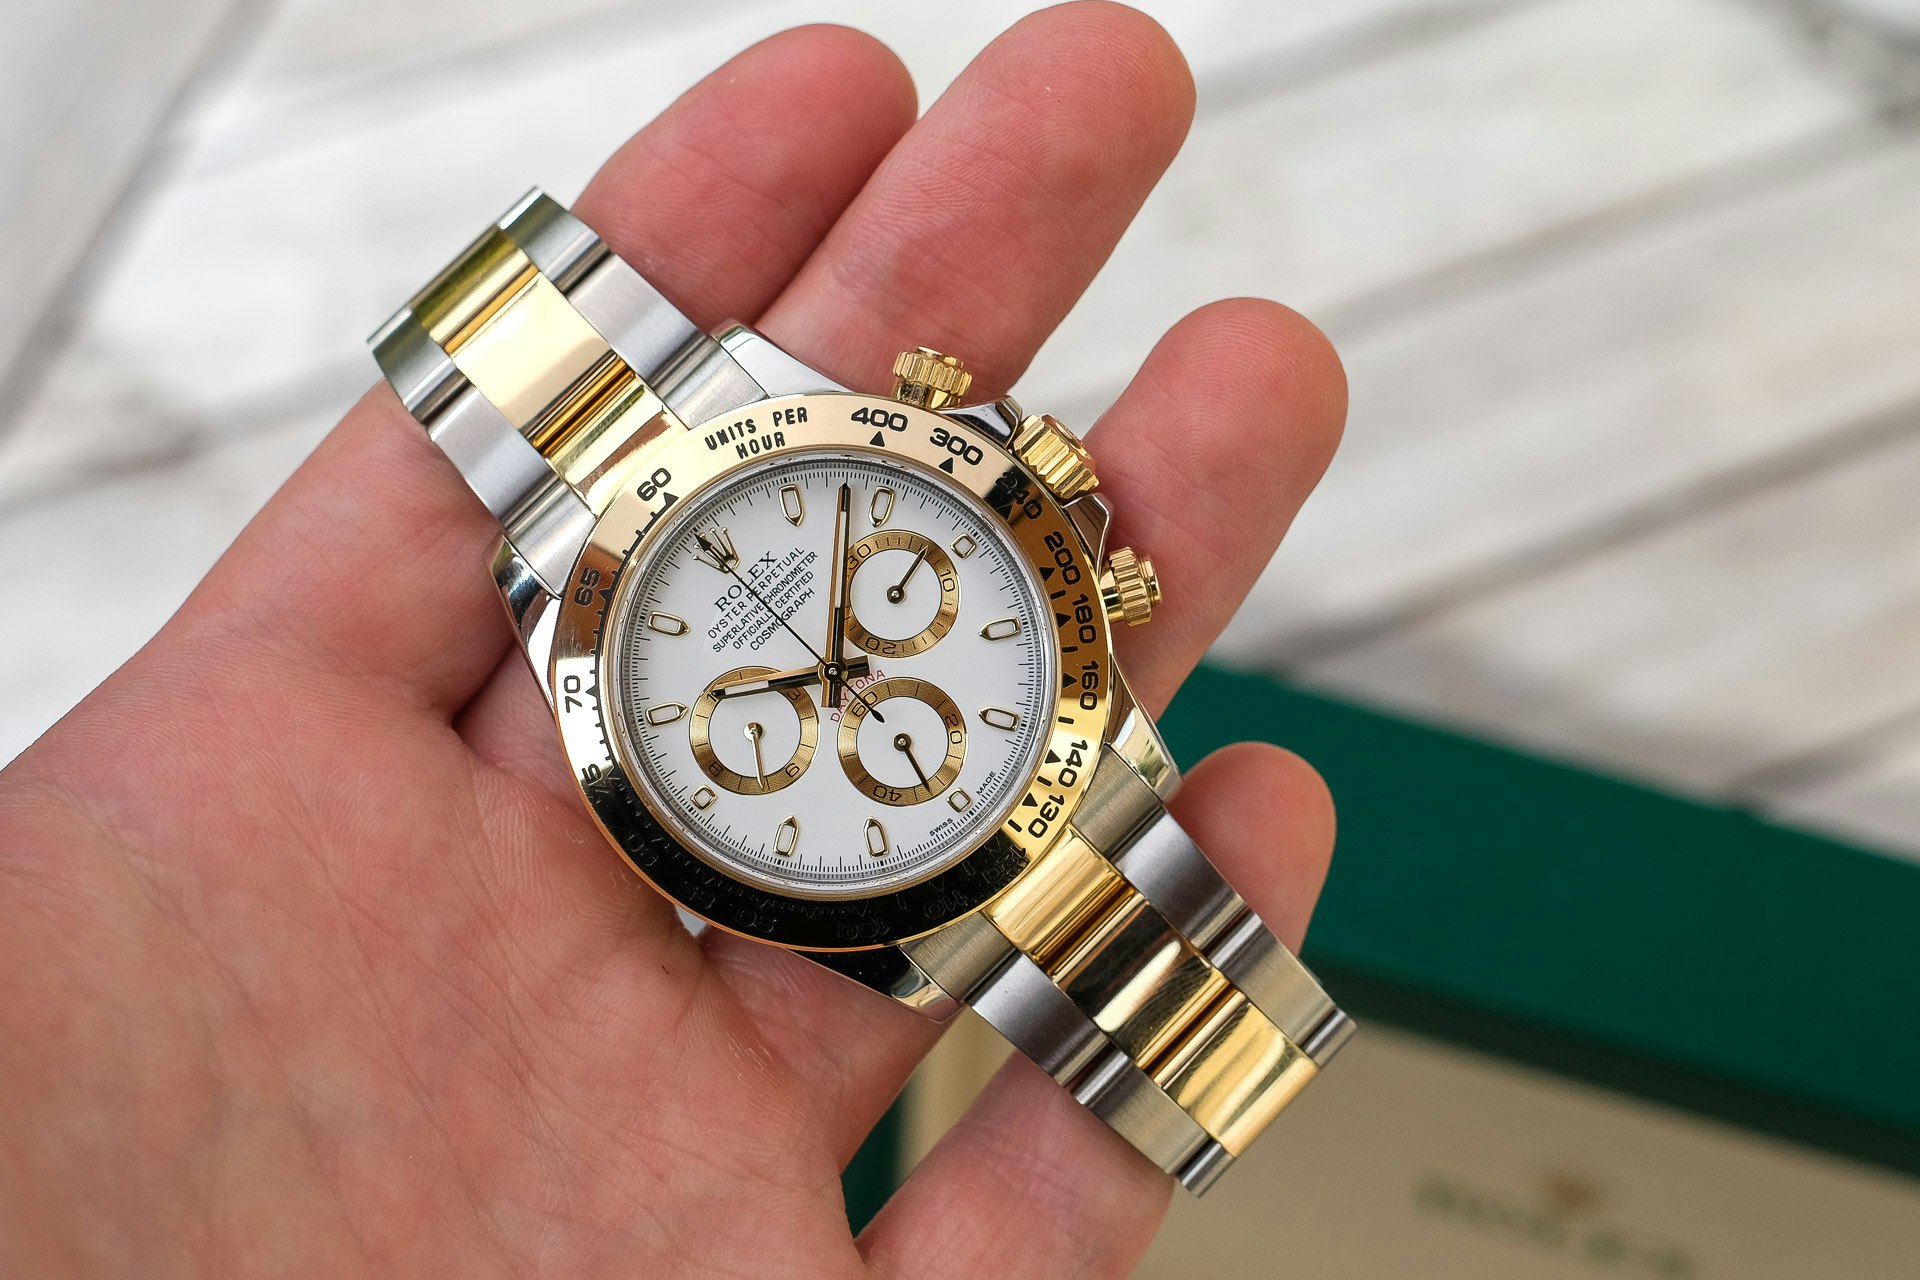 2021 ROLEX DAYTONA for sale by auction in Southmoor, Oxfordshire, United Kingdom